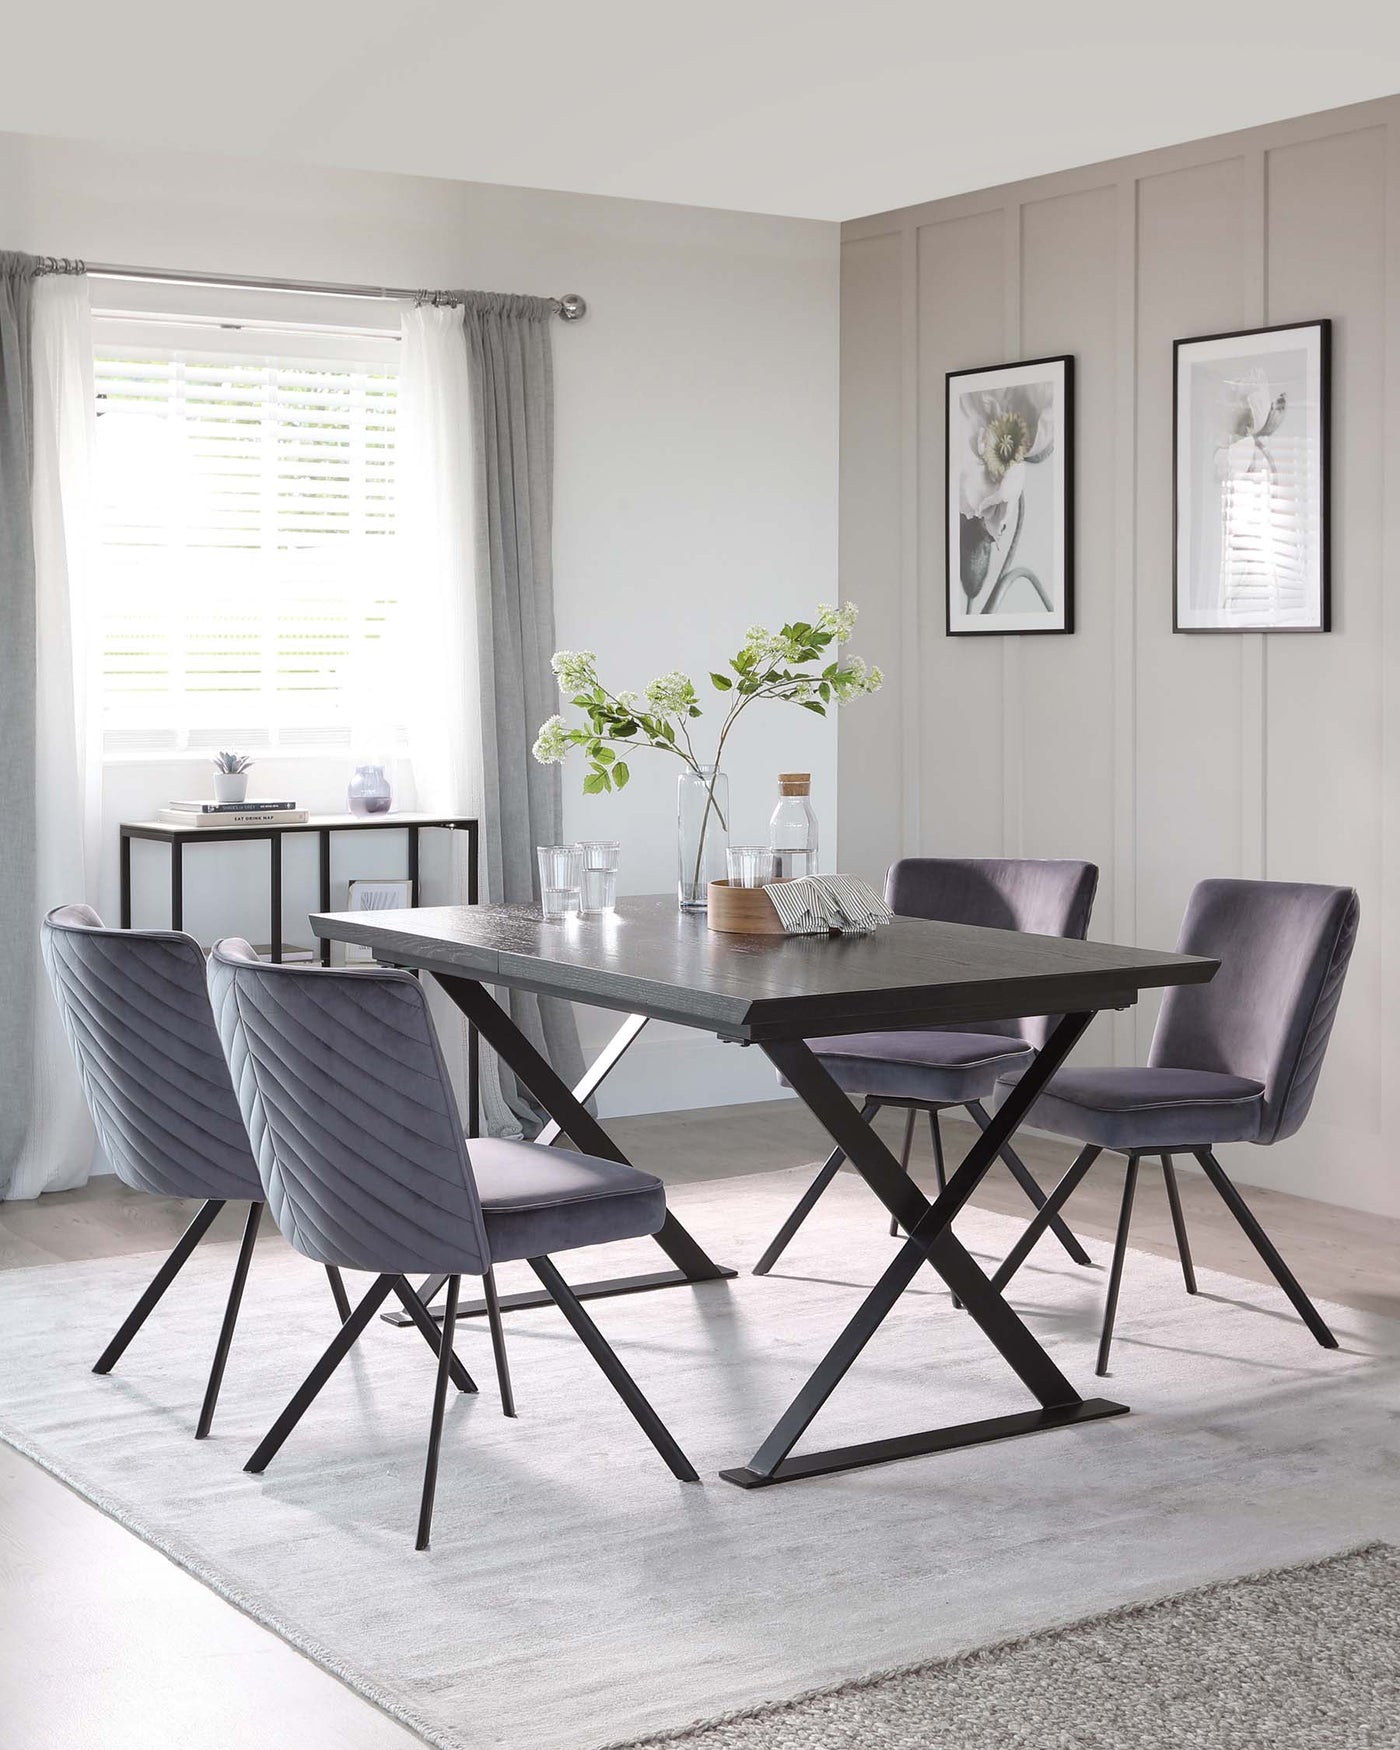 Modern dining room set featuring a rectangular dark wood table with an X-shaped leg design, accompanied by four upholstered dining chairs with channel tufting and sleek black legs. A minimalist sideboard with a two-tone finish completes the scene.